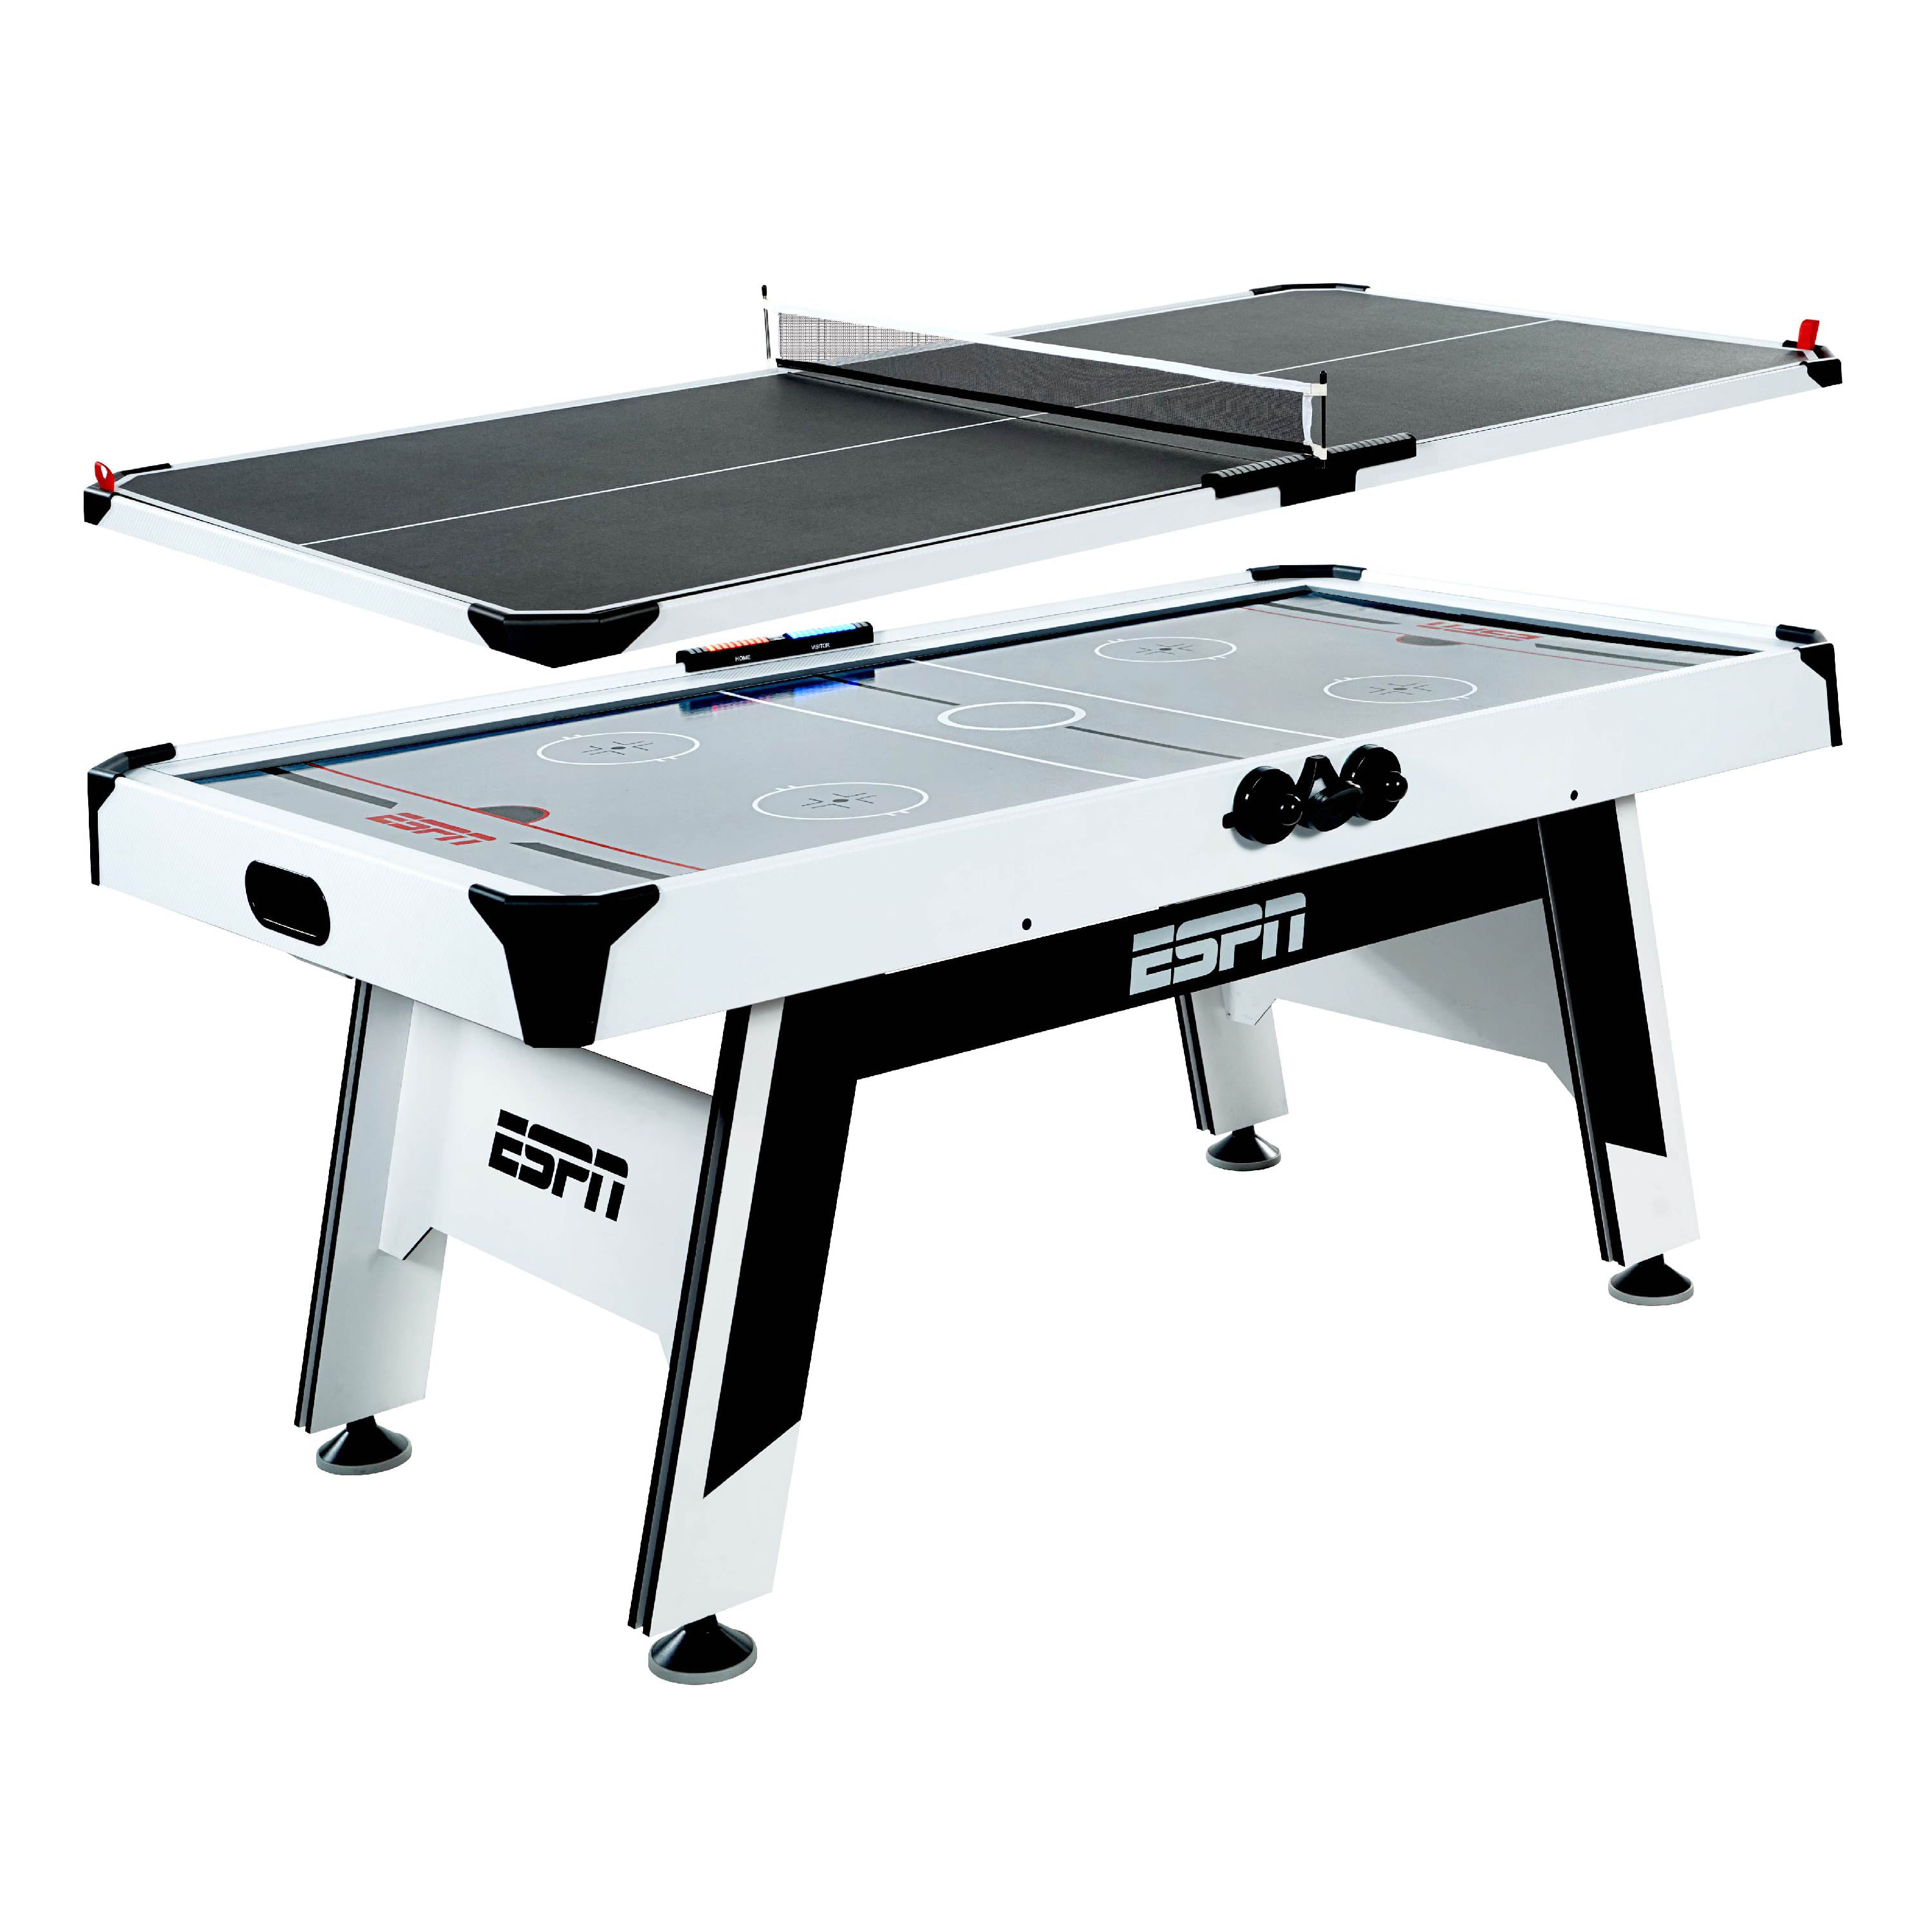 ESPN 72 in Air Hockey and Table Tennis Table, Combo Game Set, Accessories Included